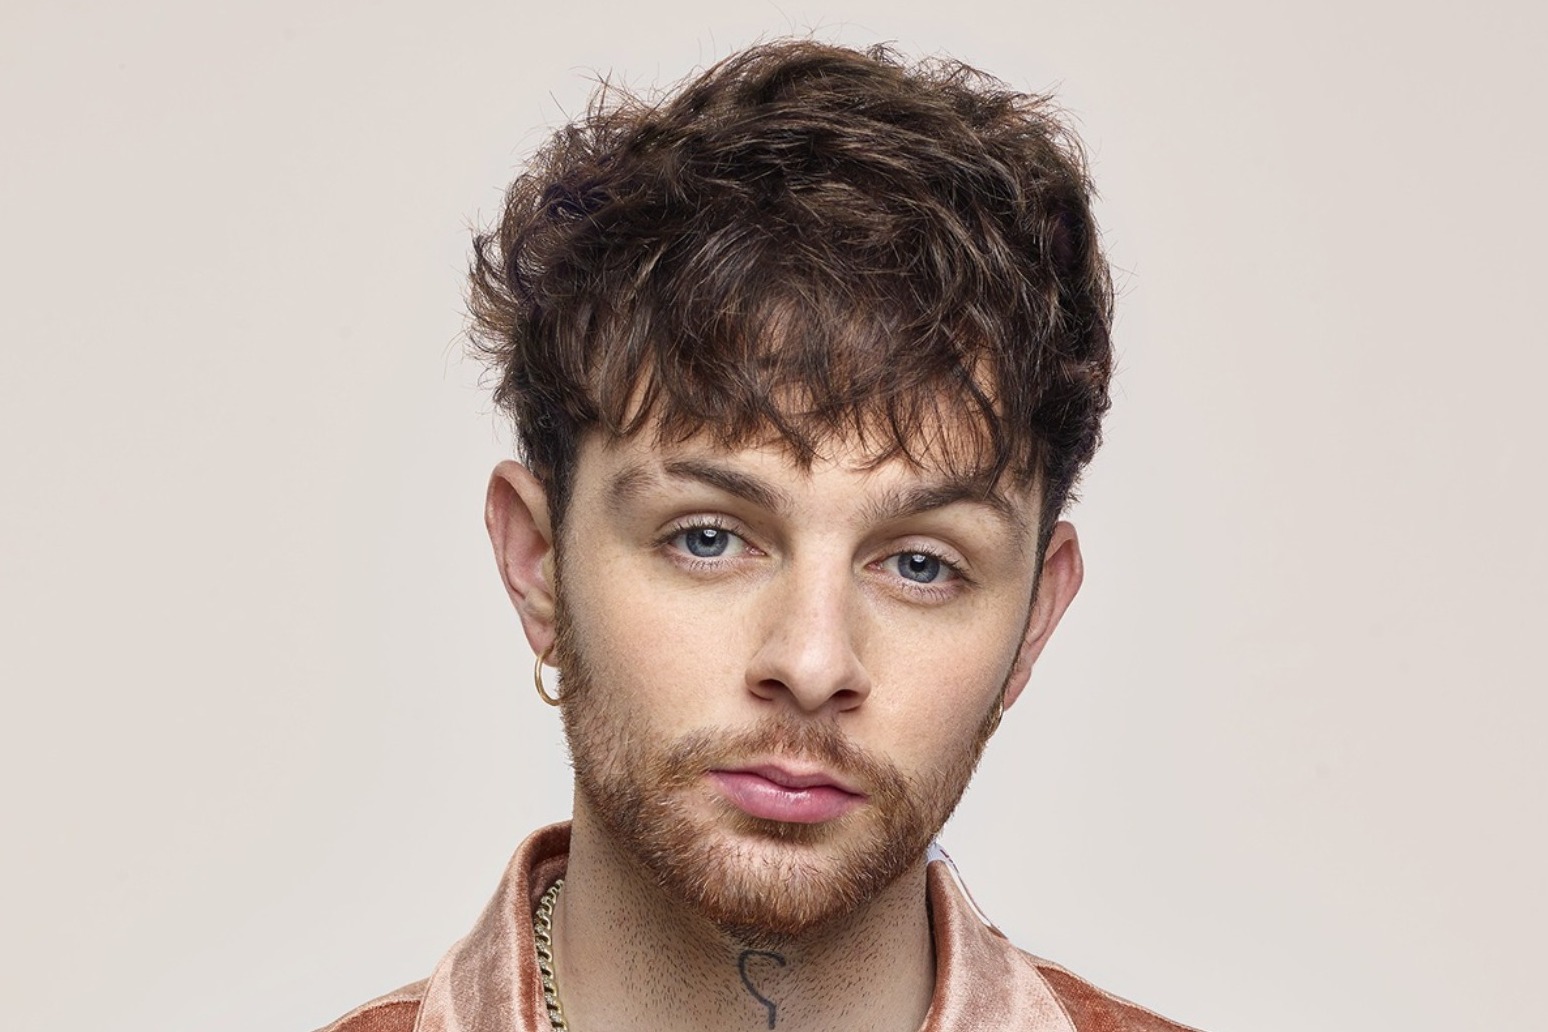 Tom Grennan thanks fans for unbelievable support after New York attack